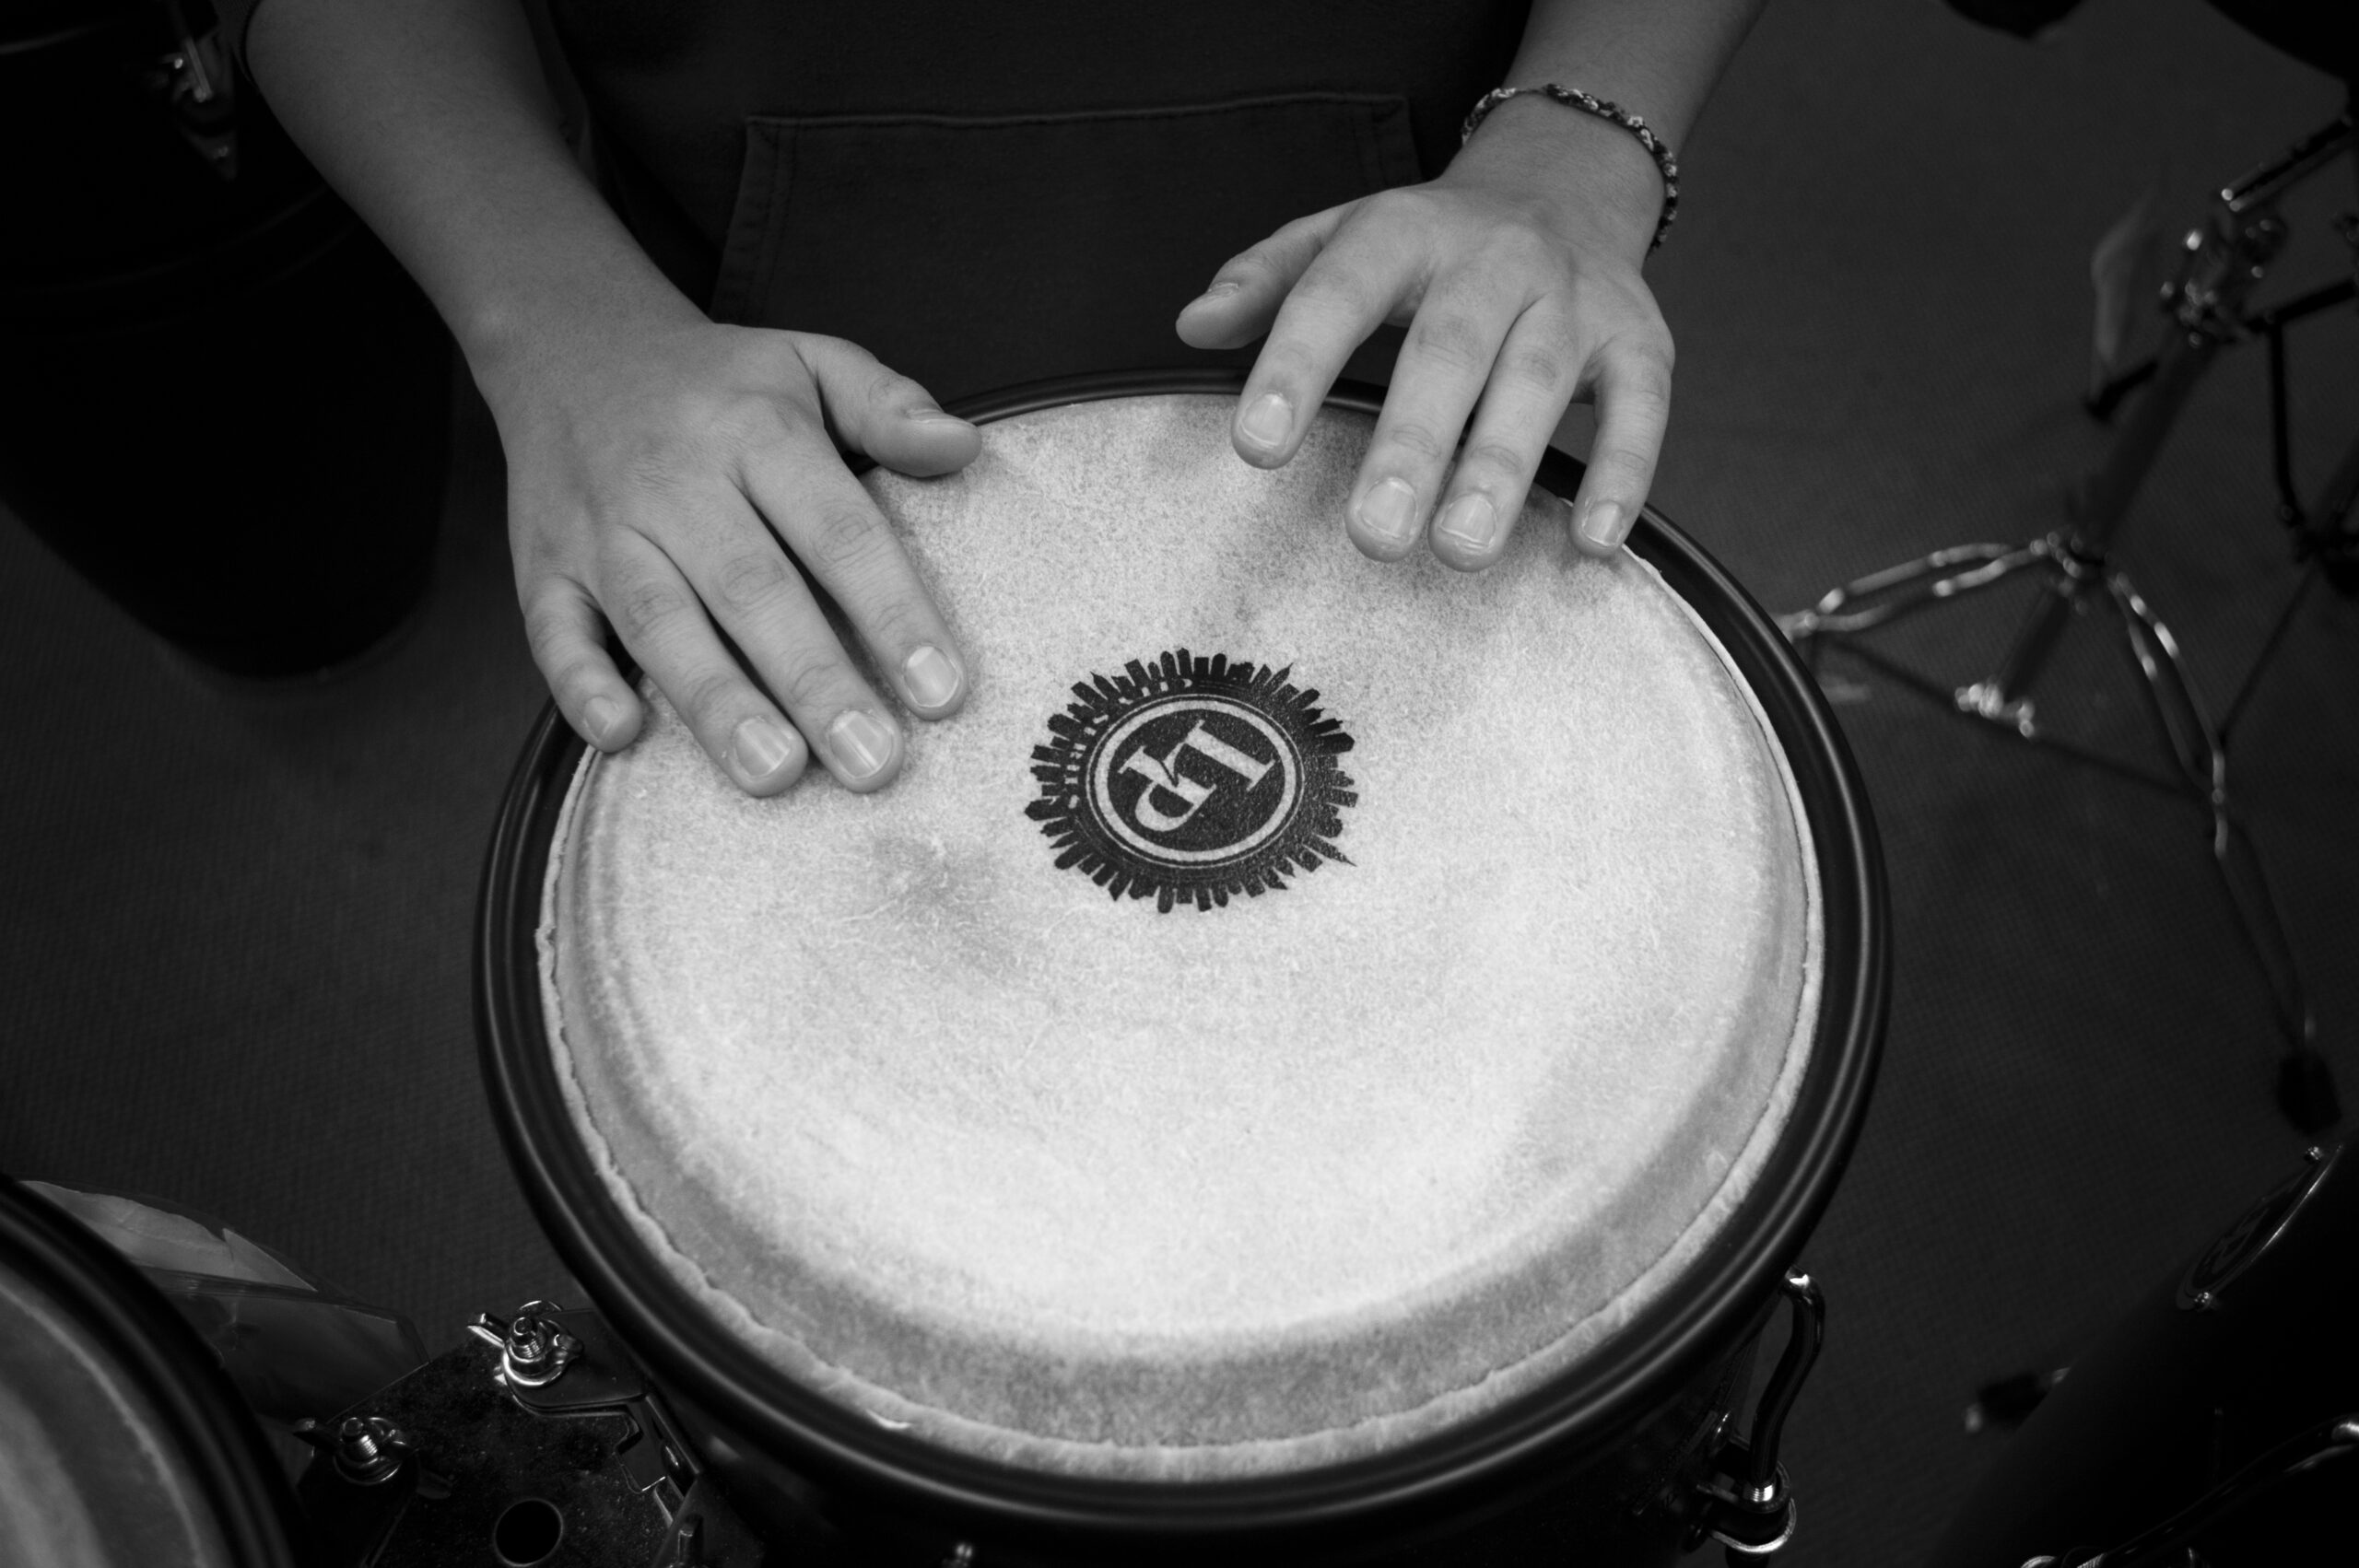 Ty Workshops: Let’s Drum Course in CBC Monkstown